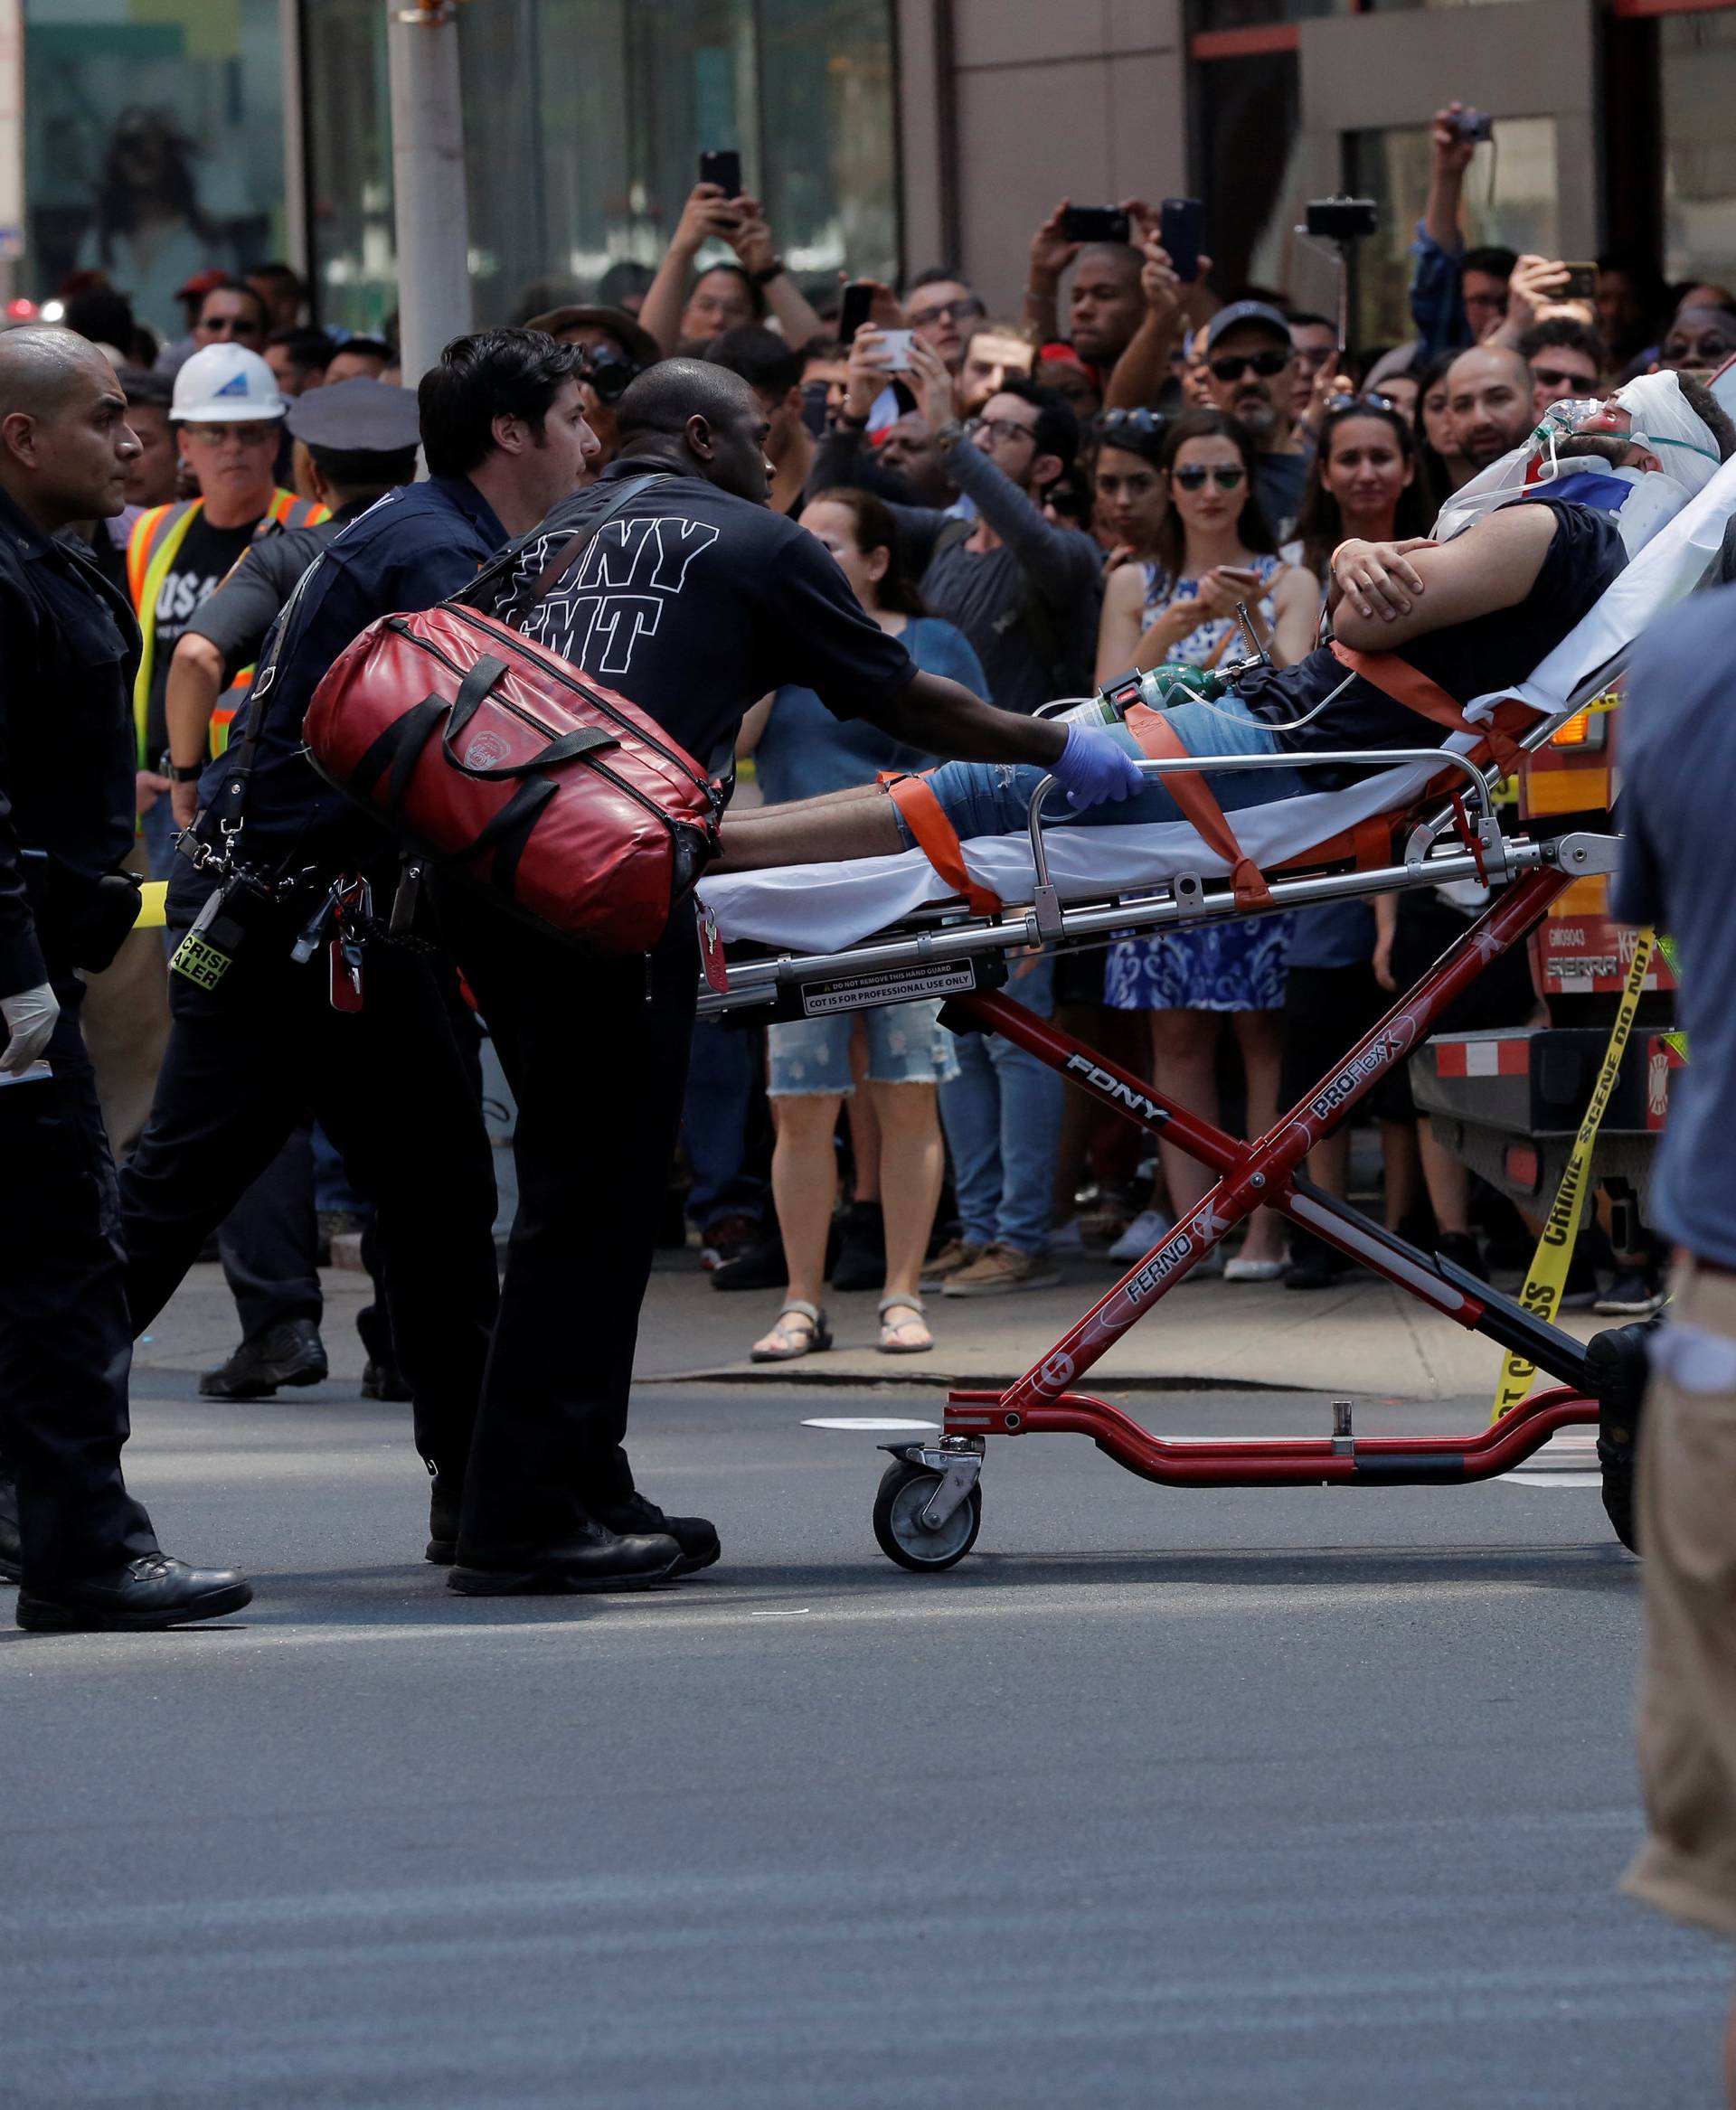 First responders tend to an injured pedestrian after a vehicle struck pedestrians on a sidewalk in Times Square in New York